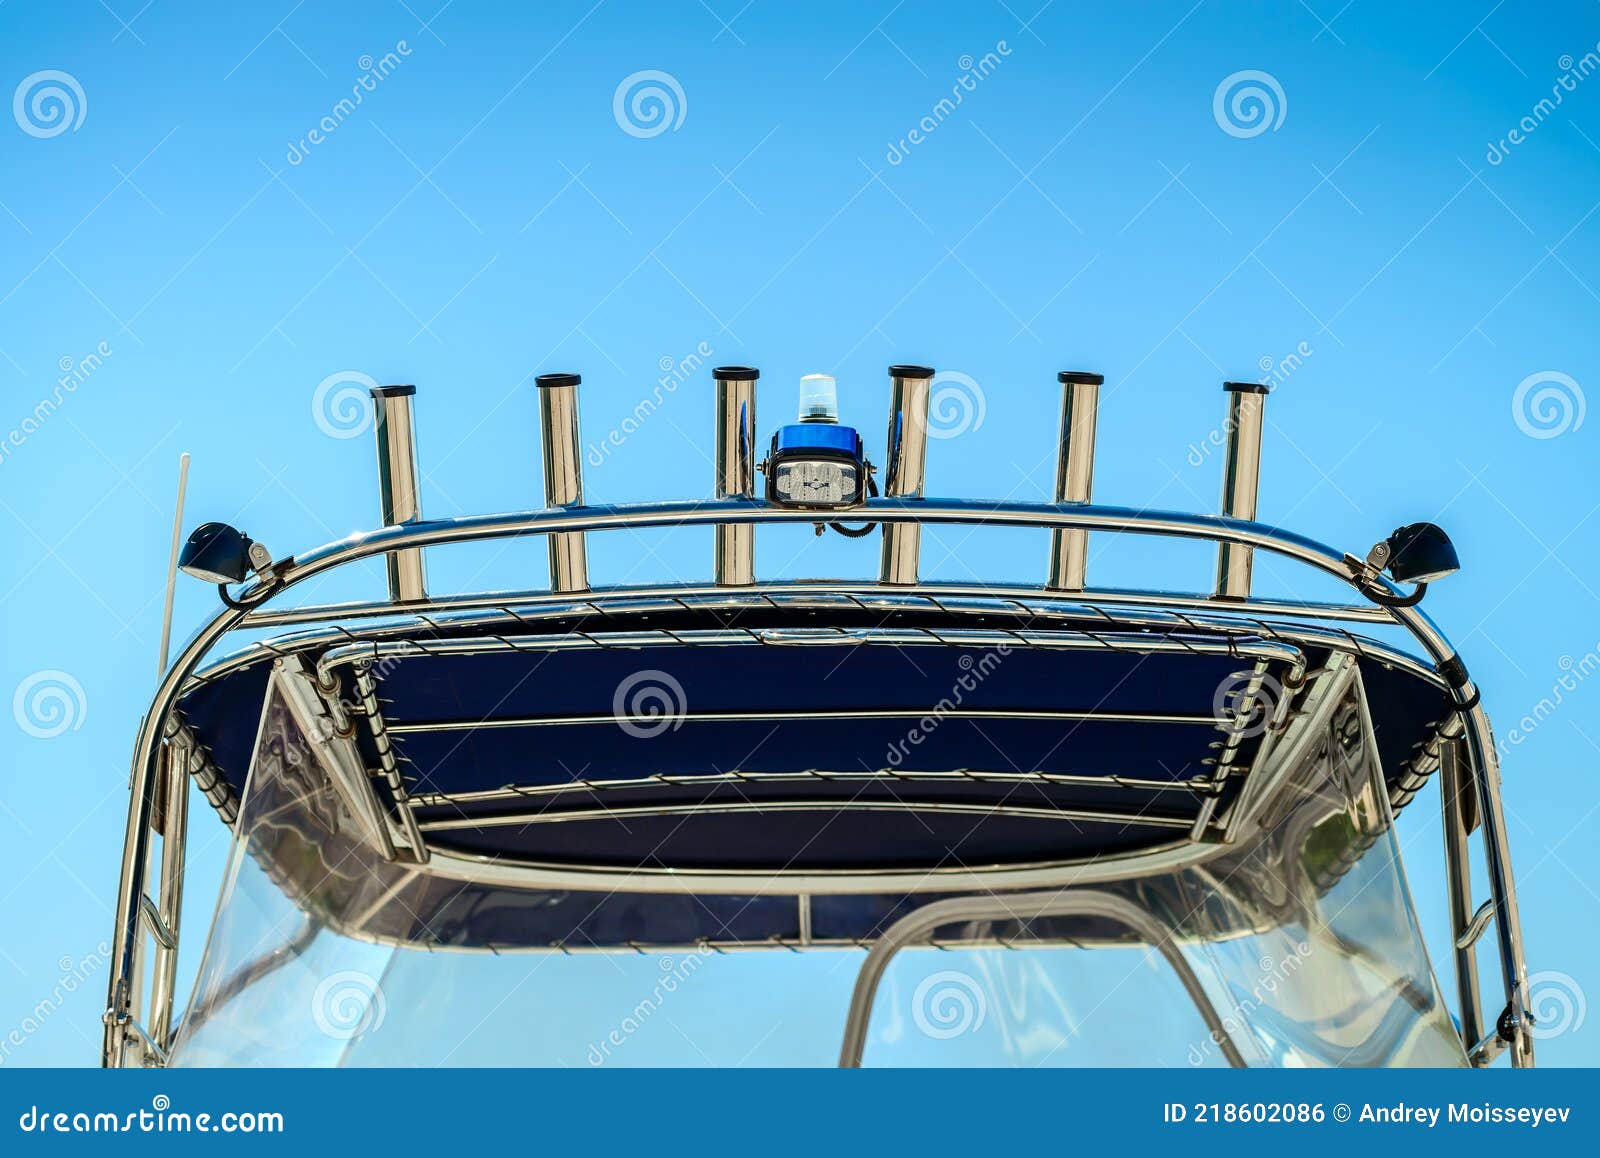 Boat Fishing Rod Holders on Top of the Boat Stock Photo - Image of